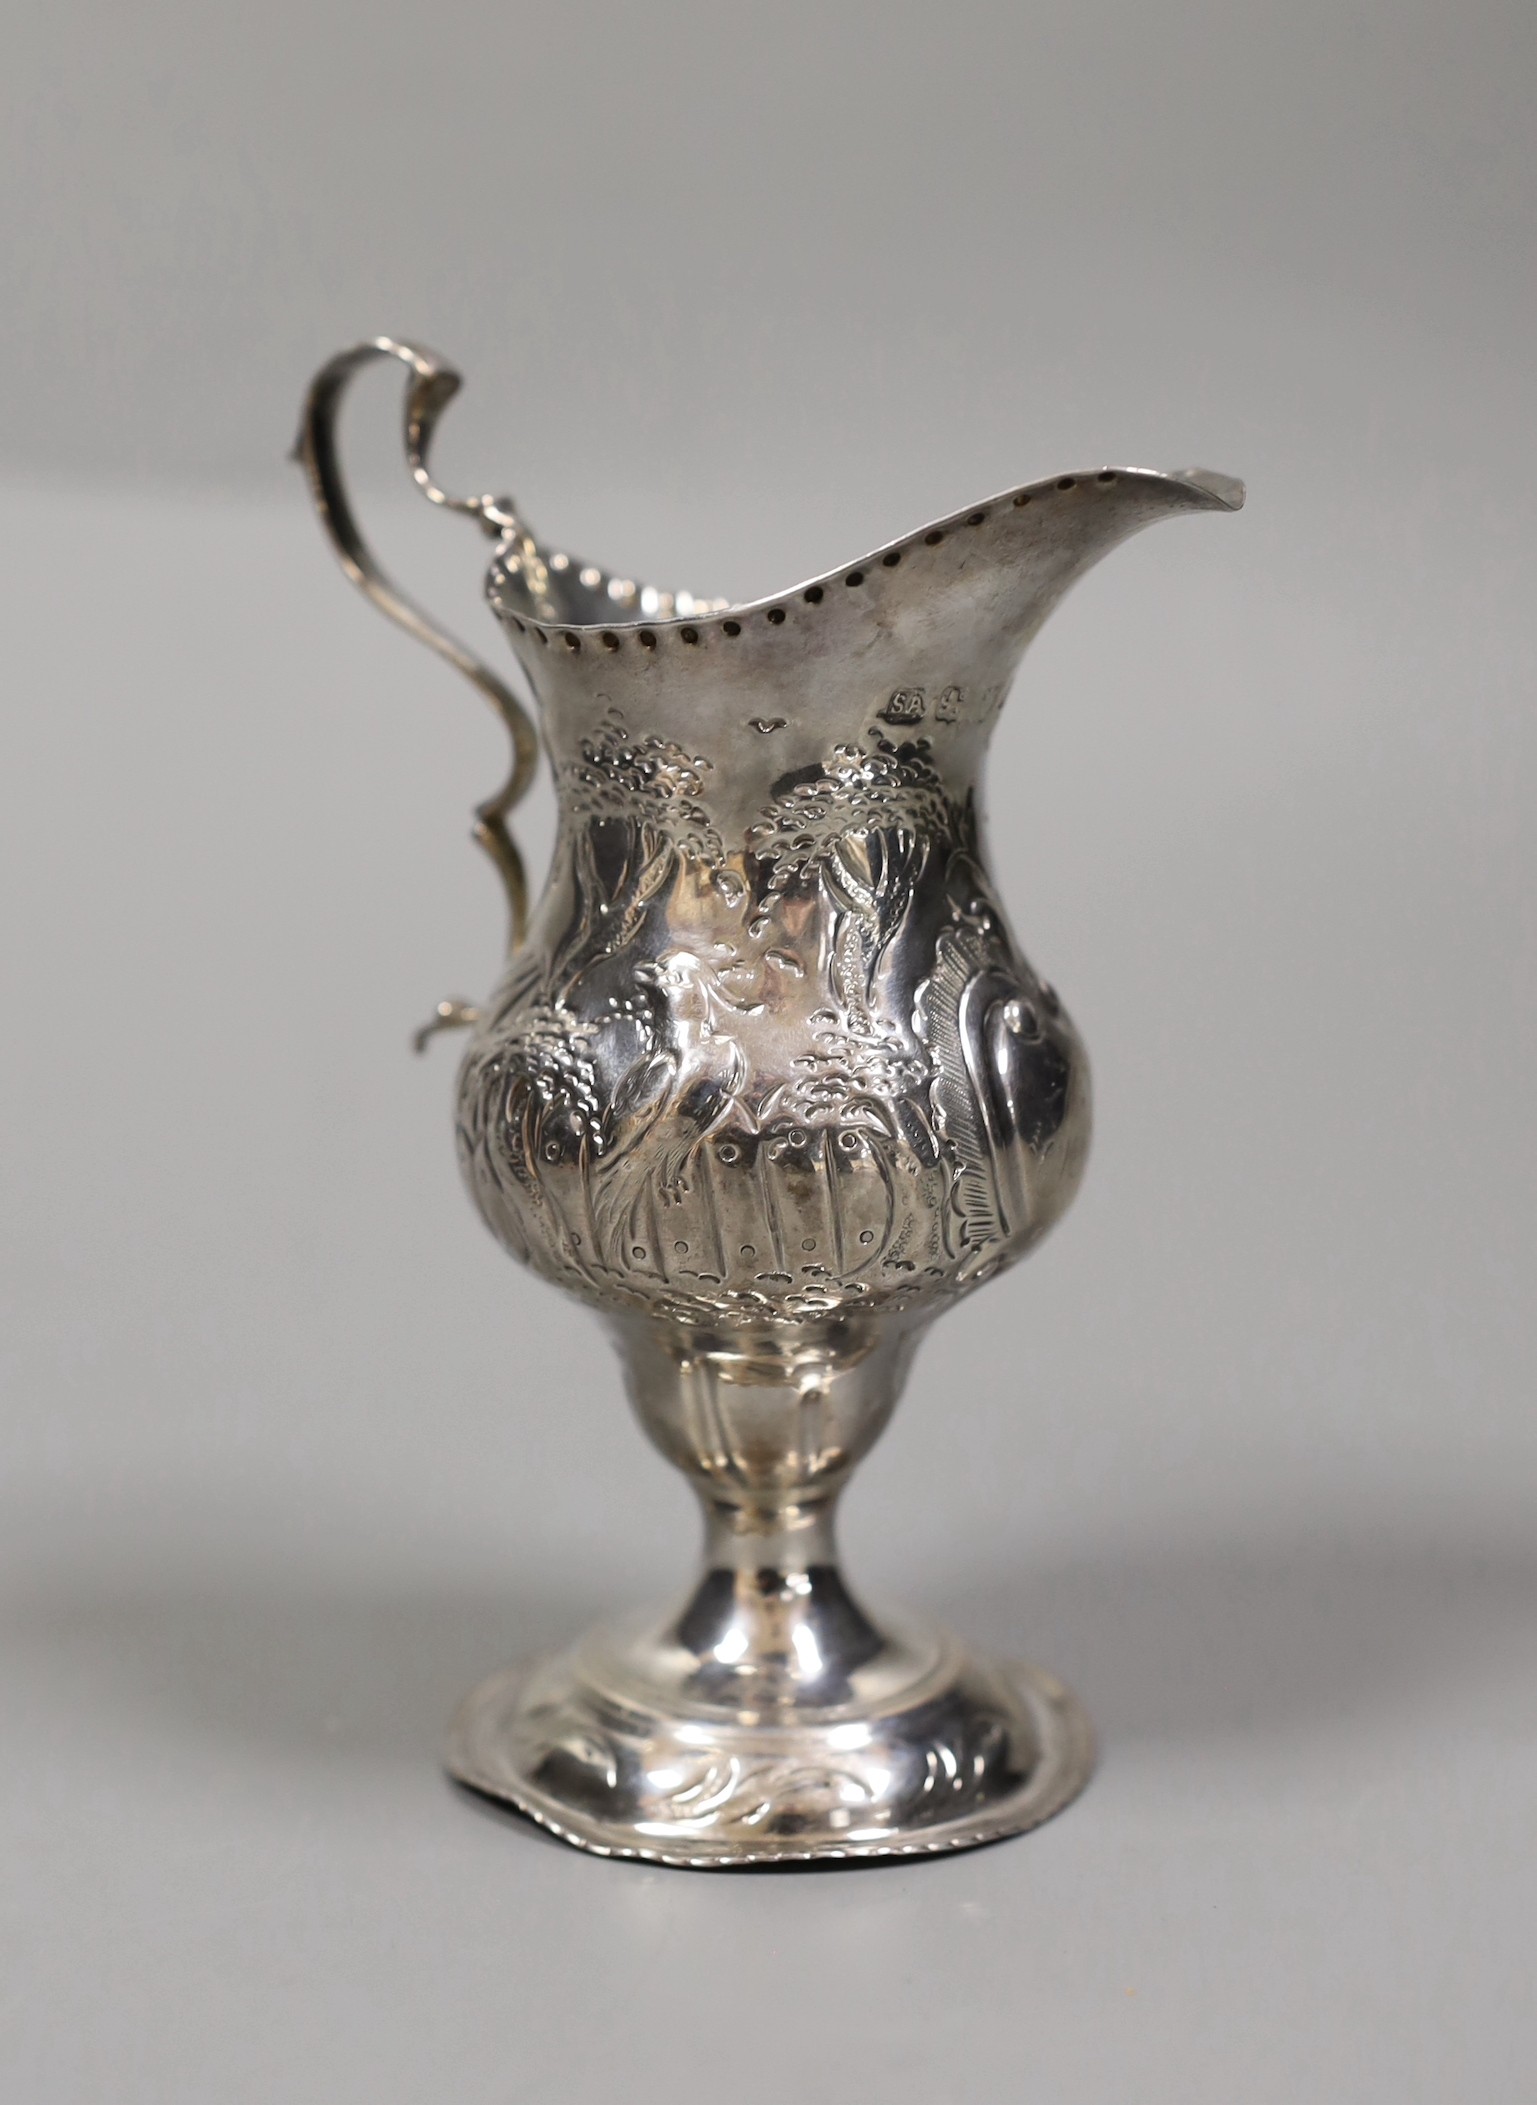 A George III silver inverted pear shaped cream jug, with later embossed decoration, Stephen Adams I, London, 1787, 12.3cm, 73 grams.